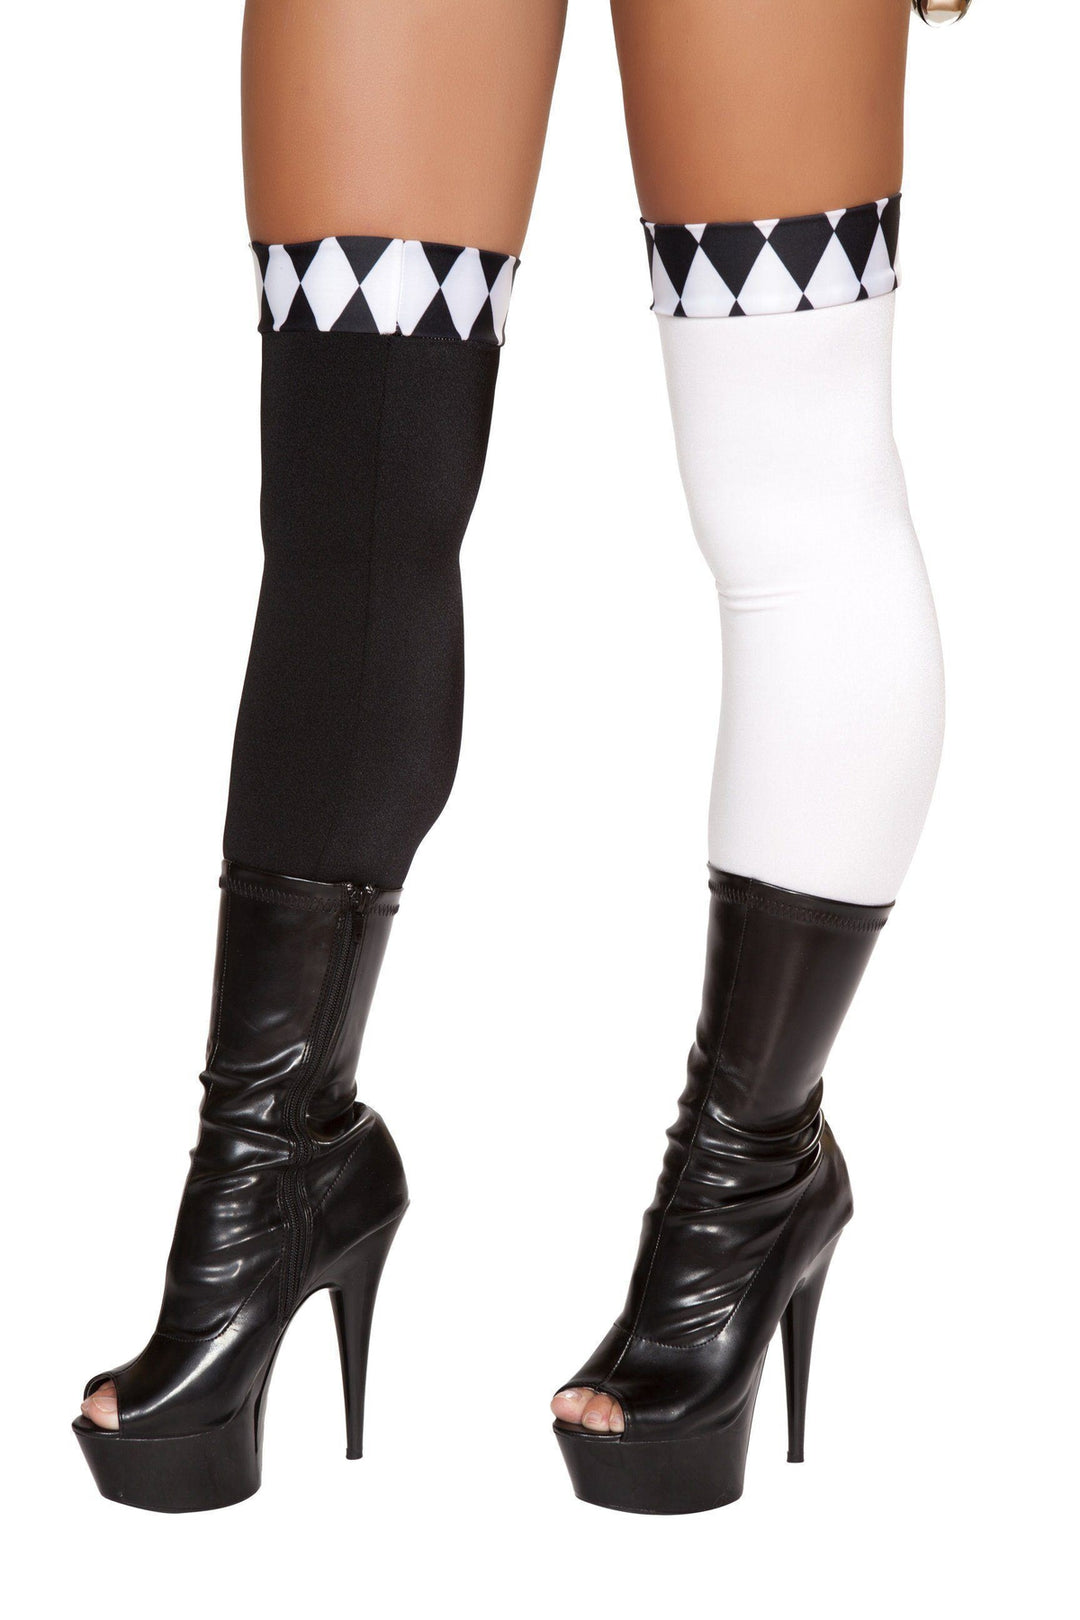 Roma Wicked Jester Stockings Costume-SEXYSHOES.COM